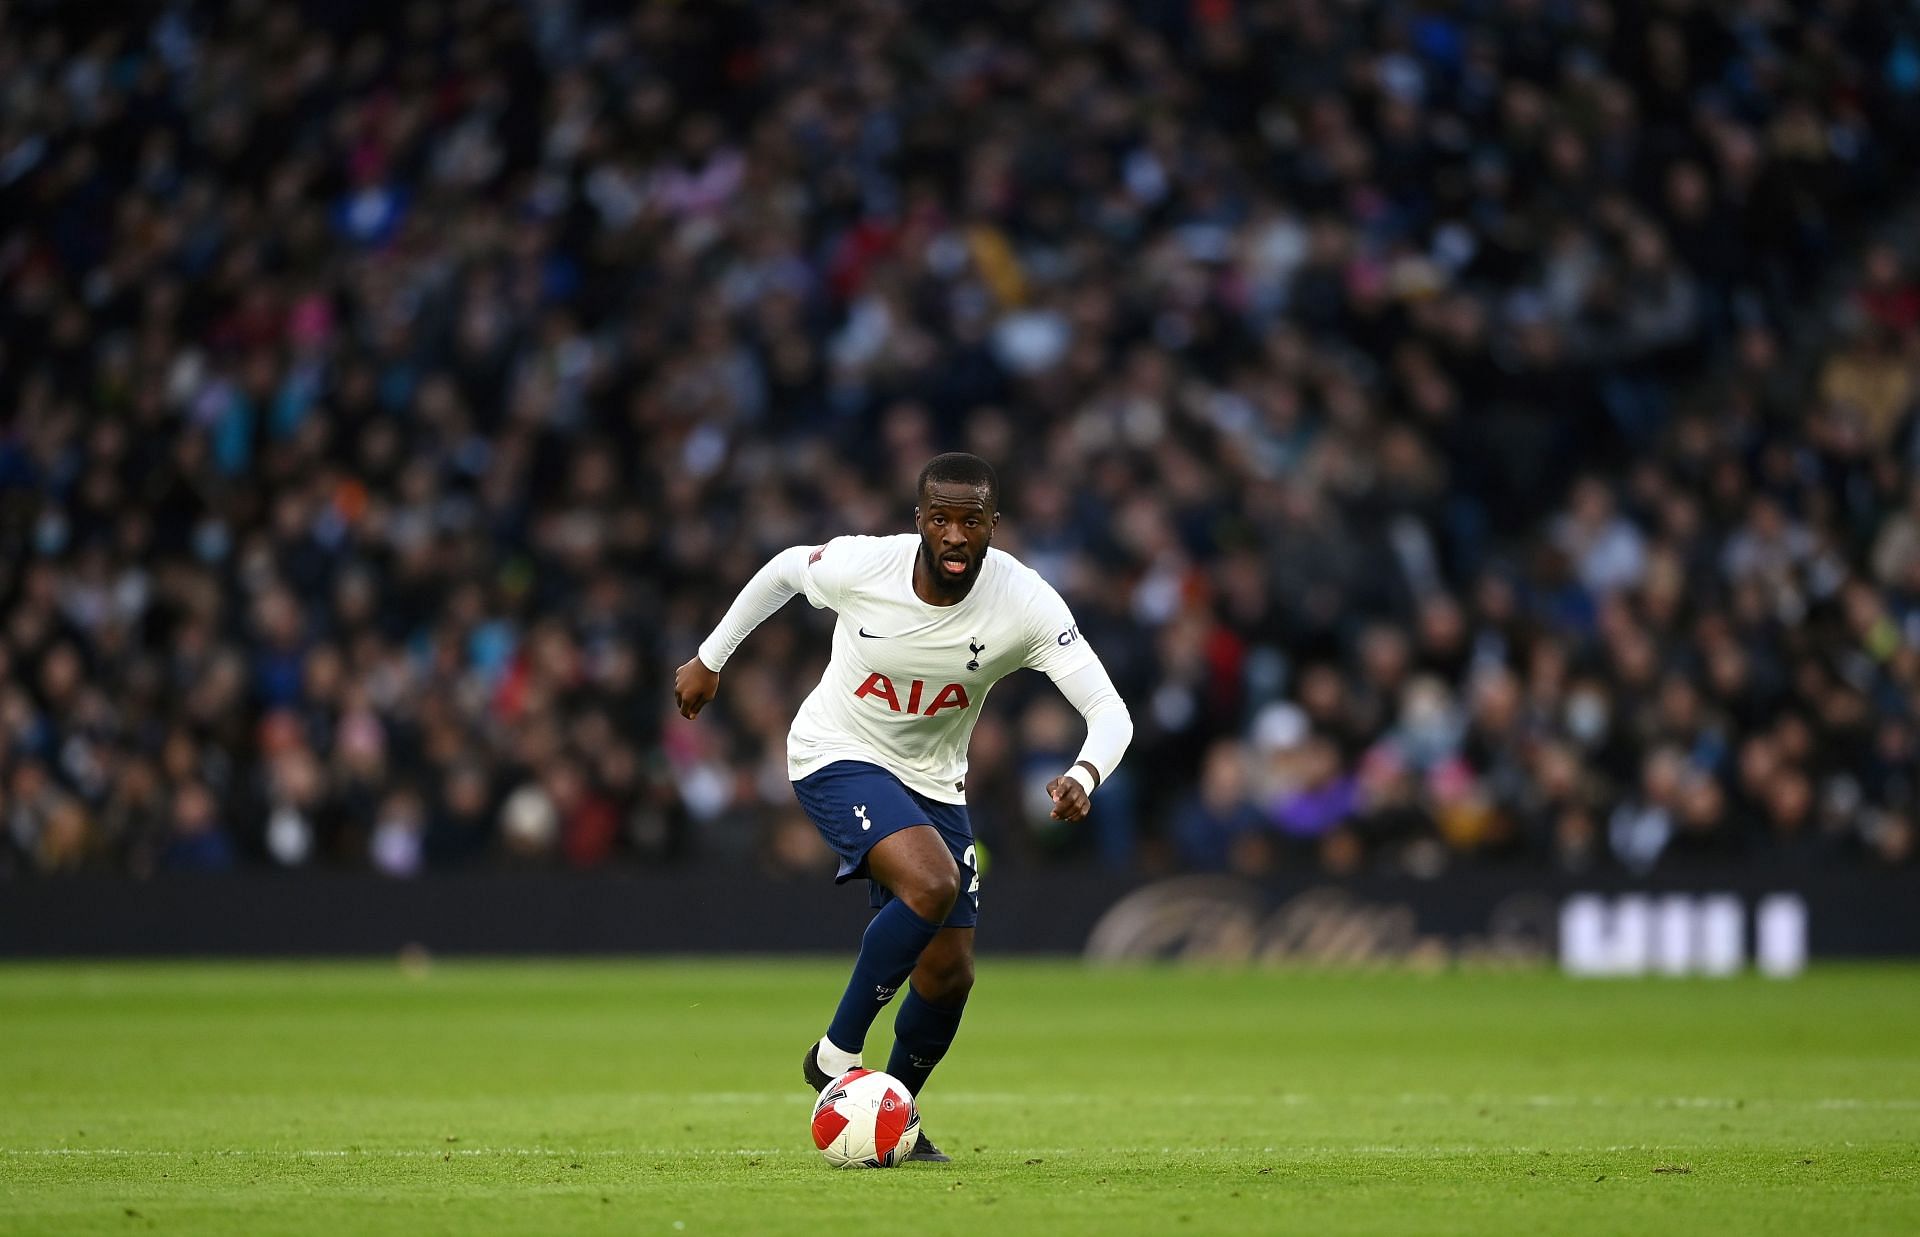 Karim Bennani has said that PSG could need Ndombele to overcome Real Madrid in the Champions League.